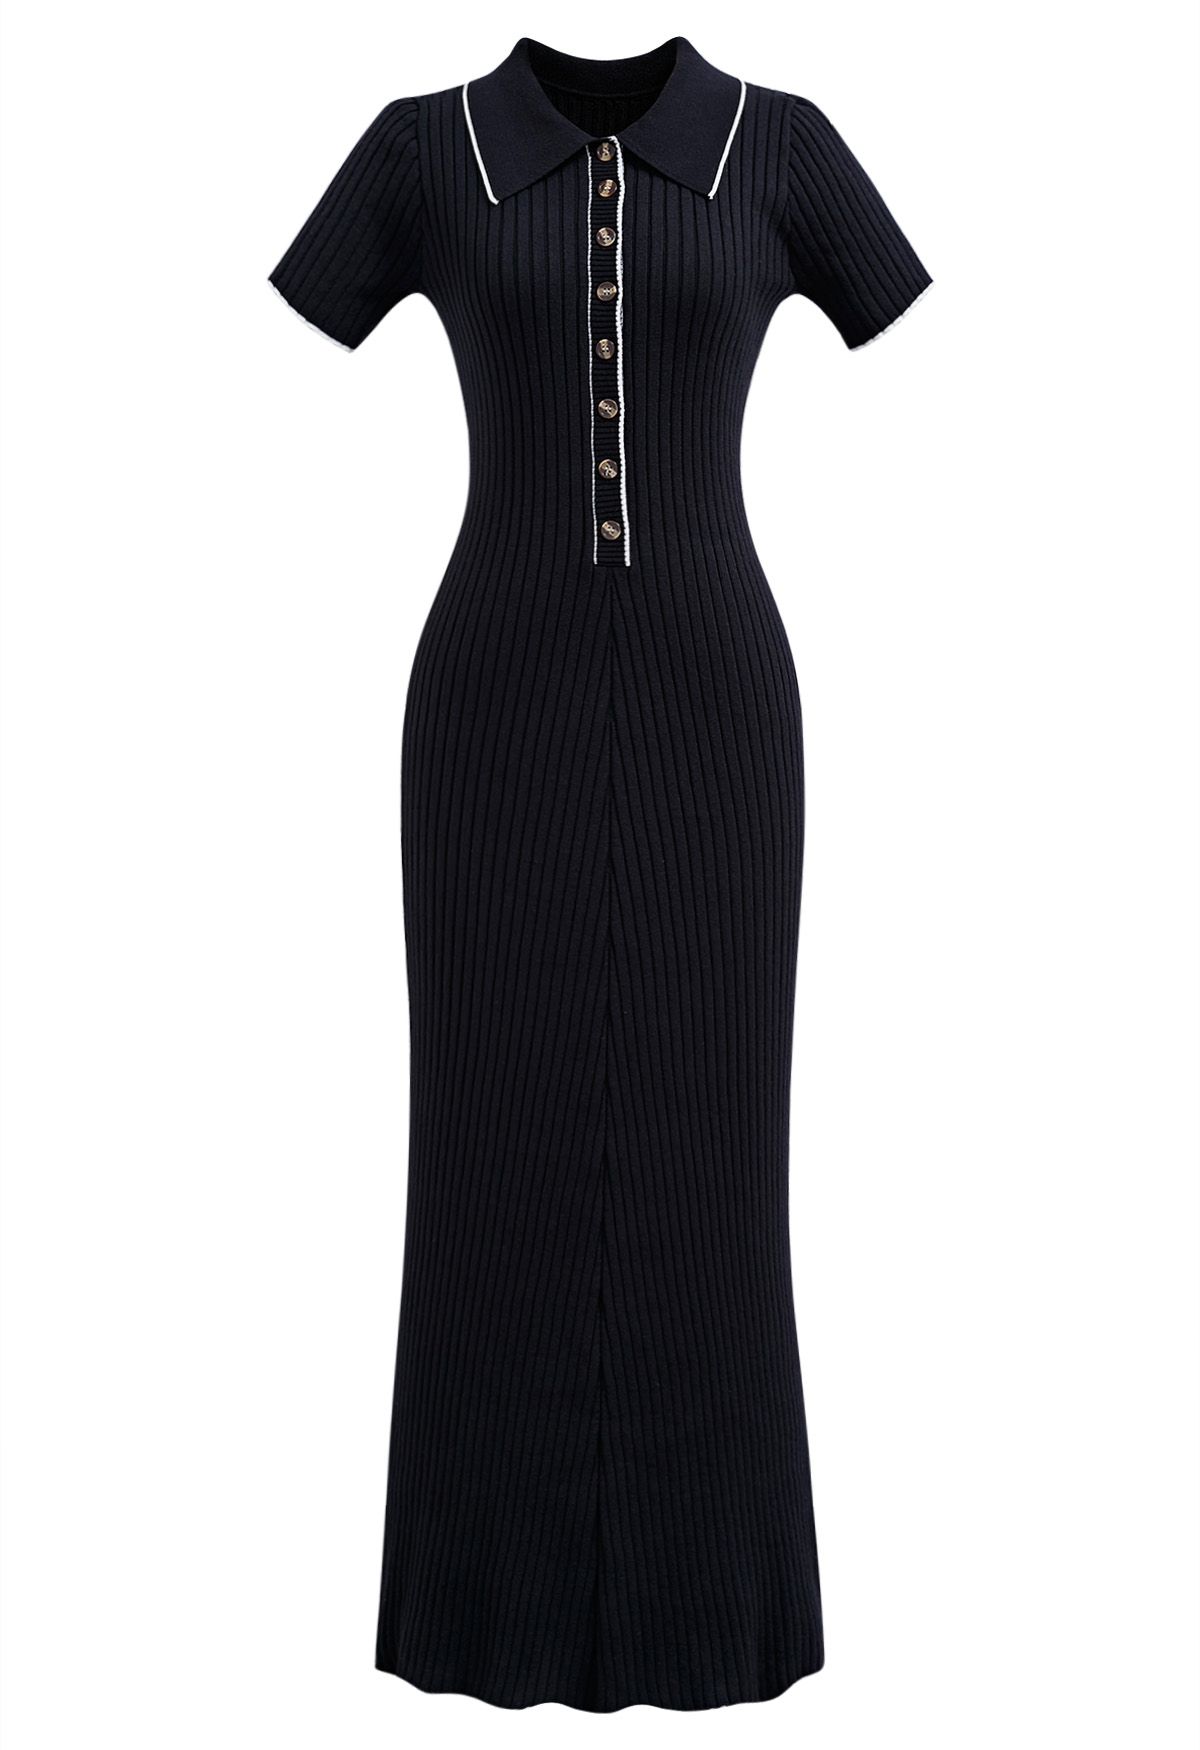 Collared Buttoned Short Sleeve Bodycon Knit Dress in Black